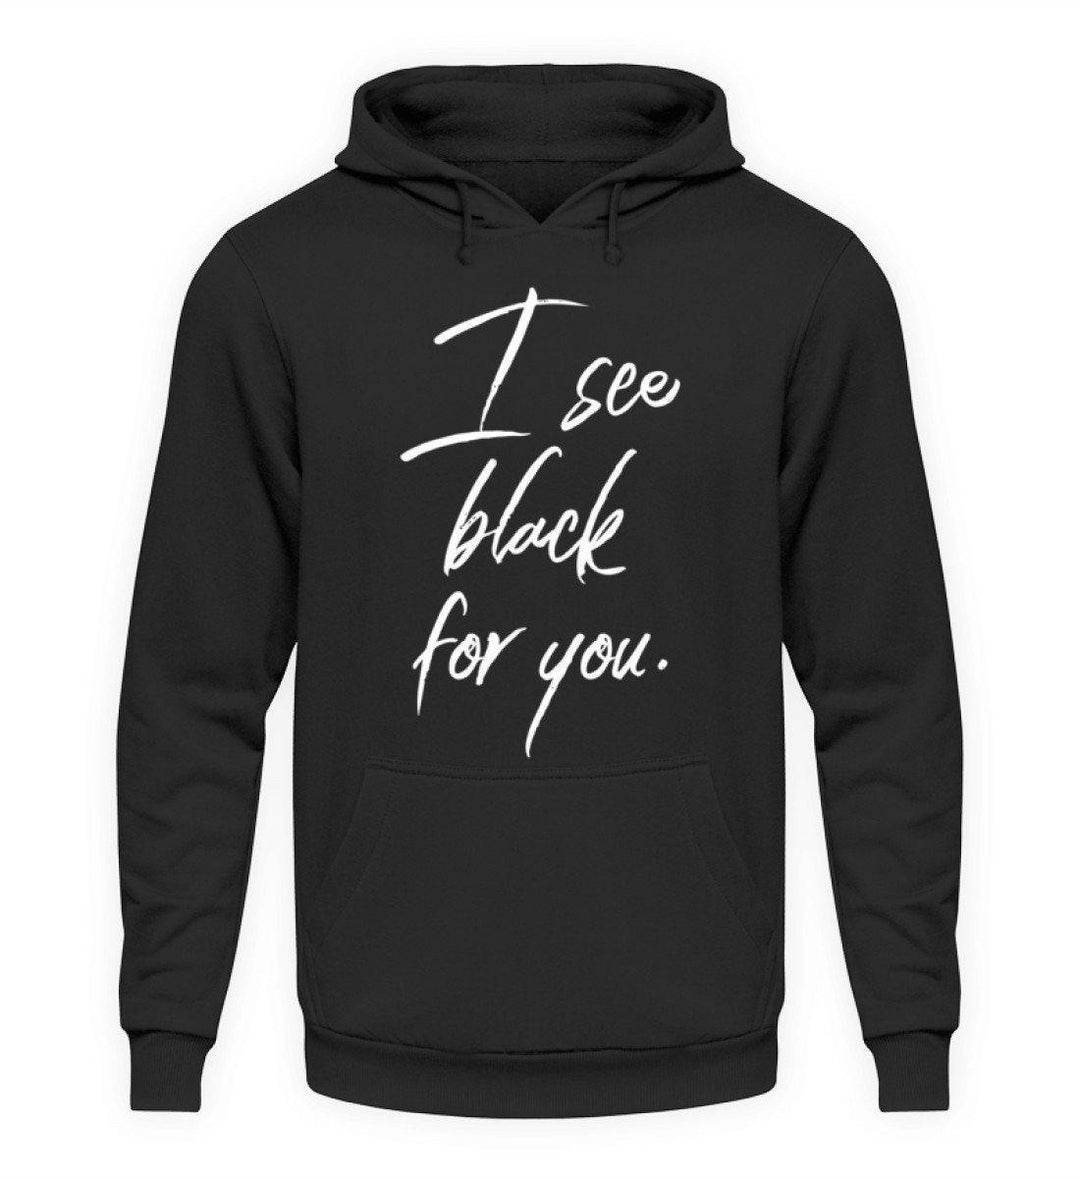 SALE - I See Black for You Unisex Hoodie